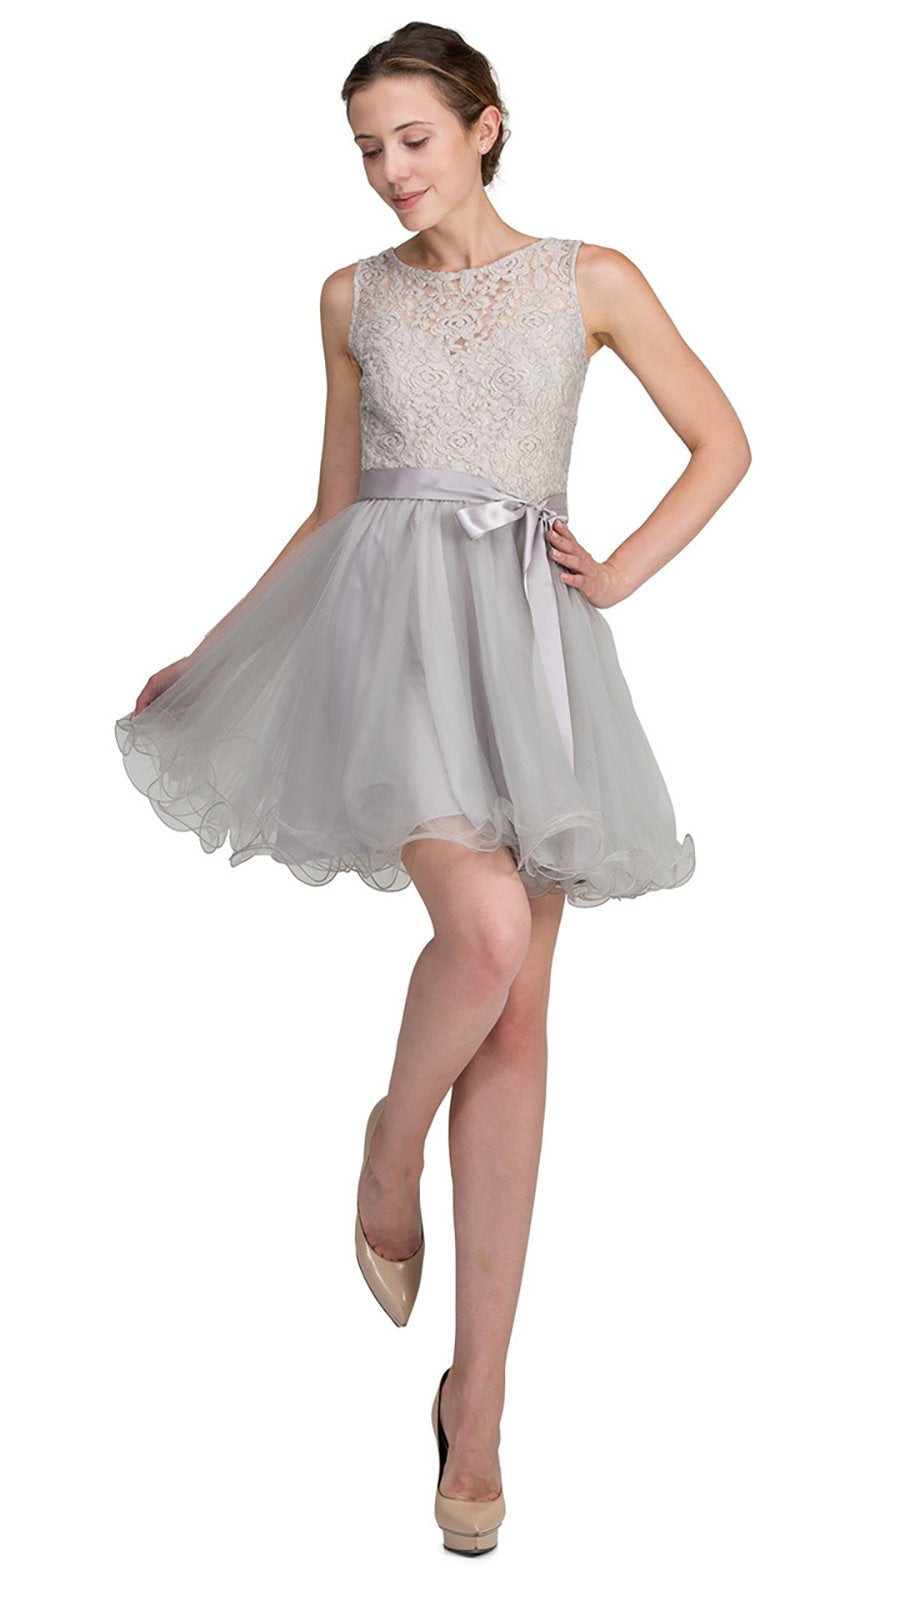 Dancing Queen - Sleeveless Lacy Illusion Short Cocktail Dress 8741 In Silver